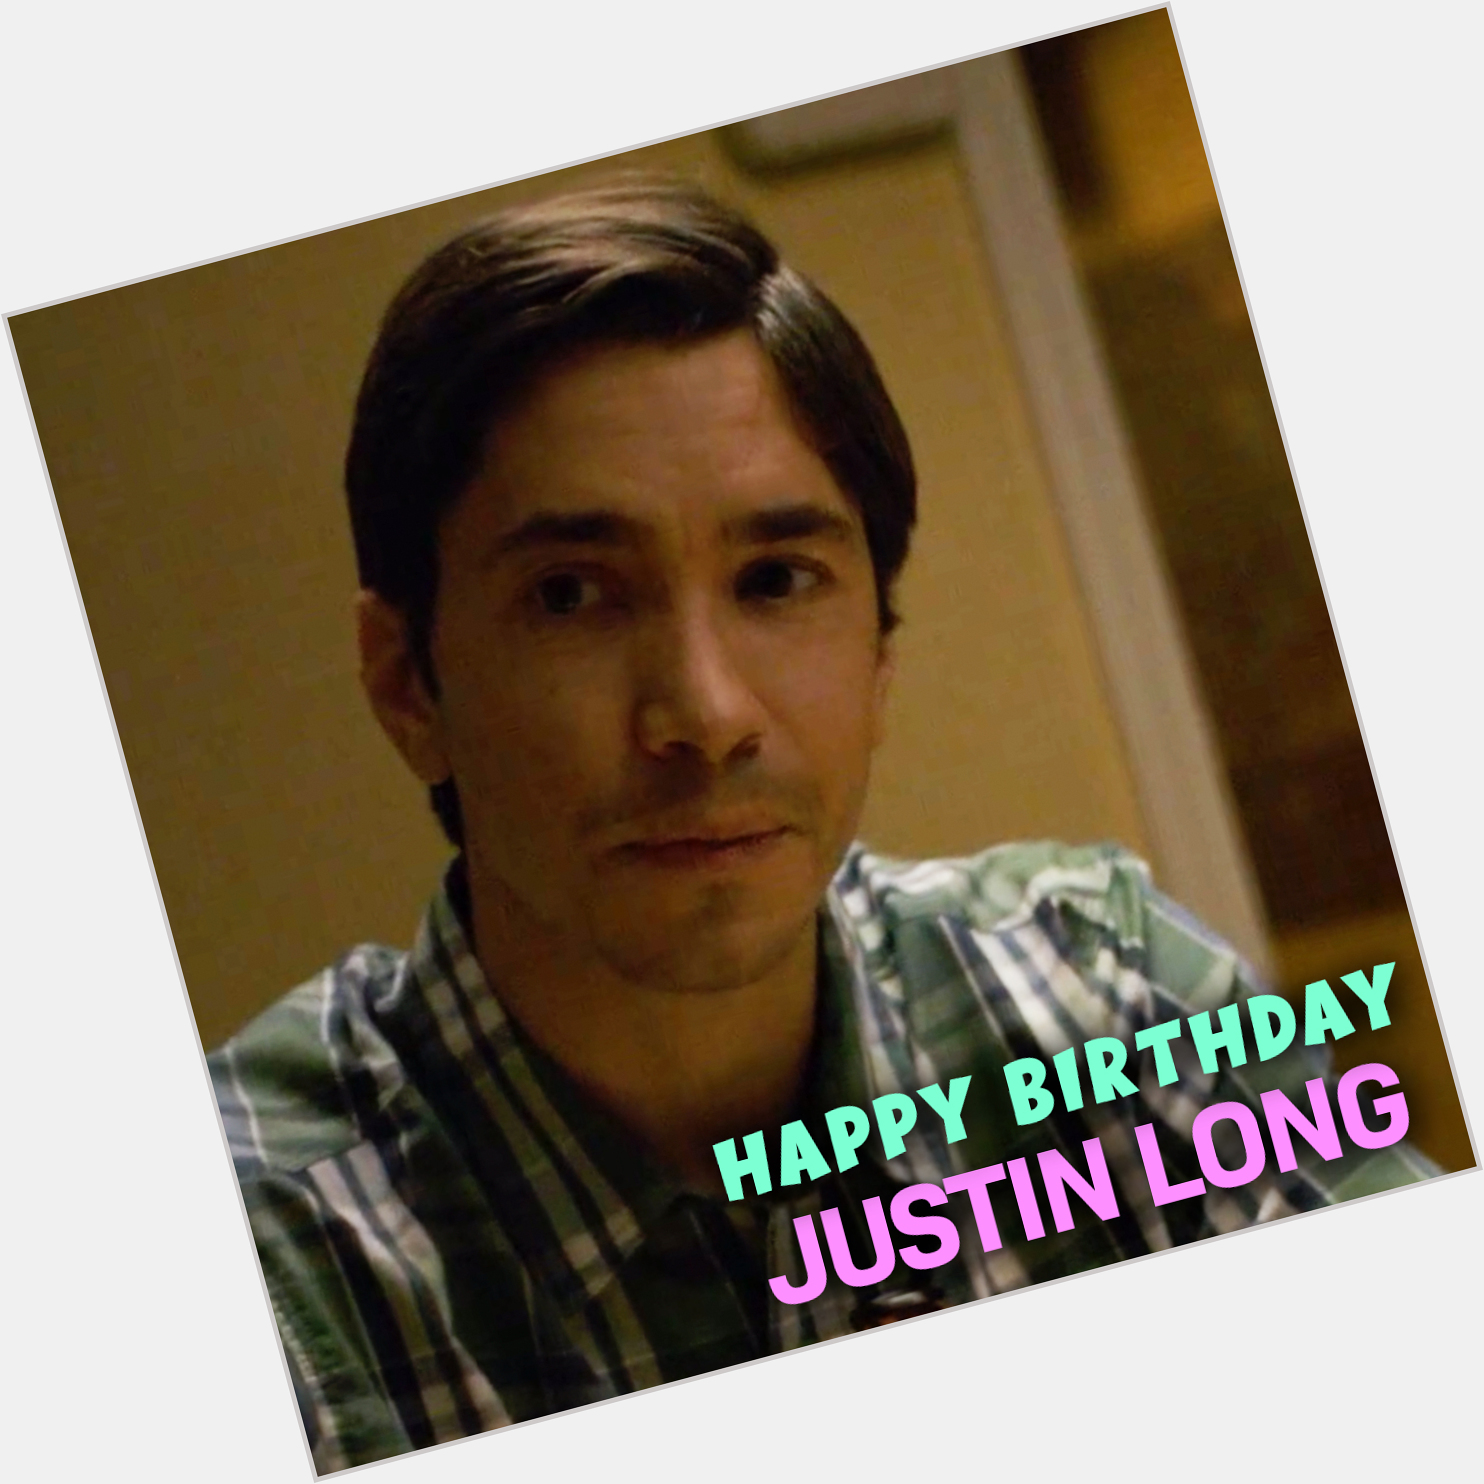 Happy birthday wishes to the one and only Justin Long! He played Tim in our 2017 film, AND THEN I GO. 